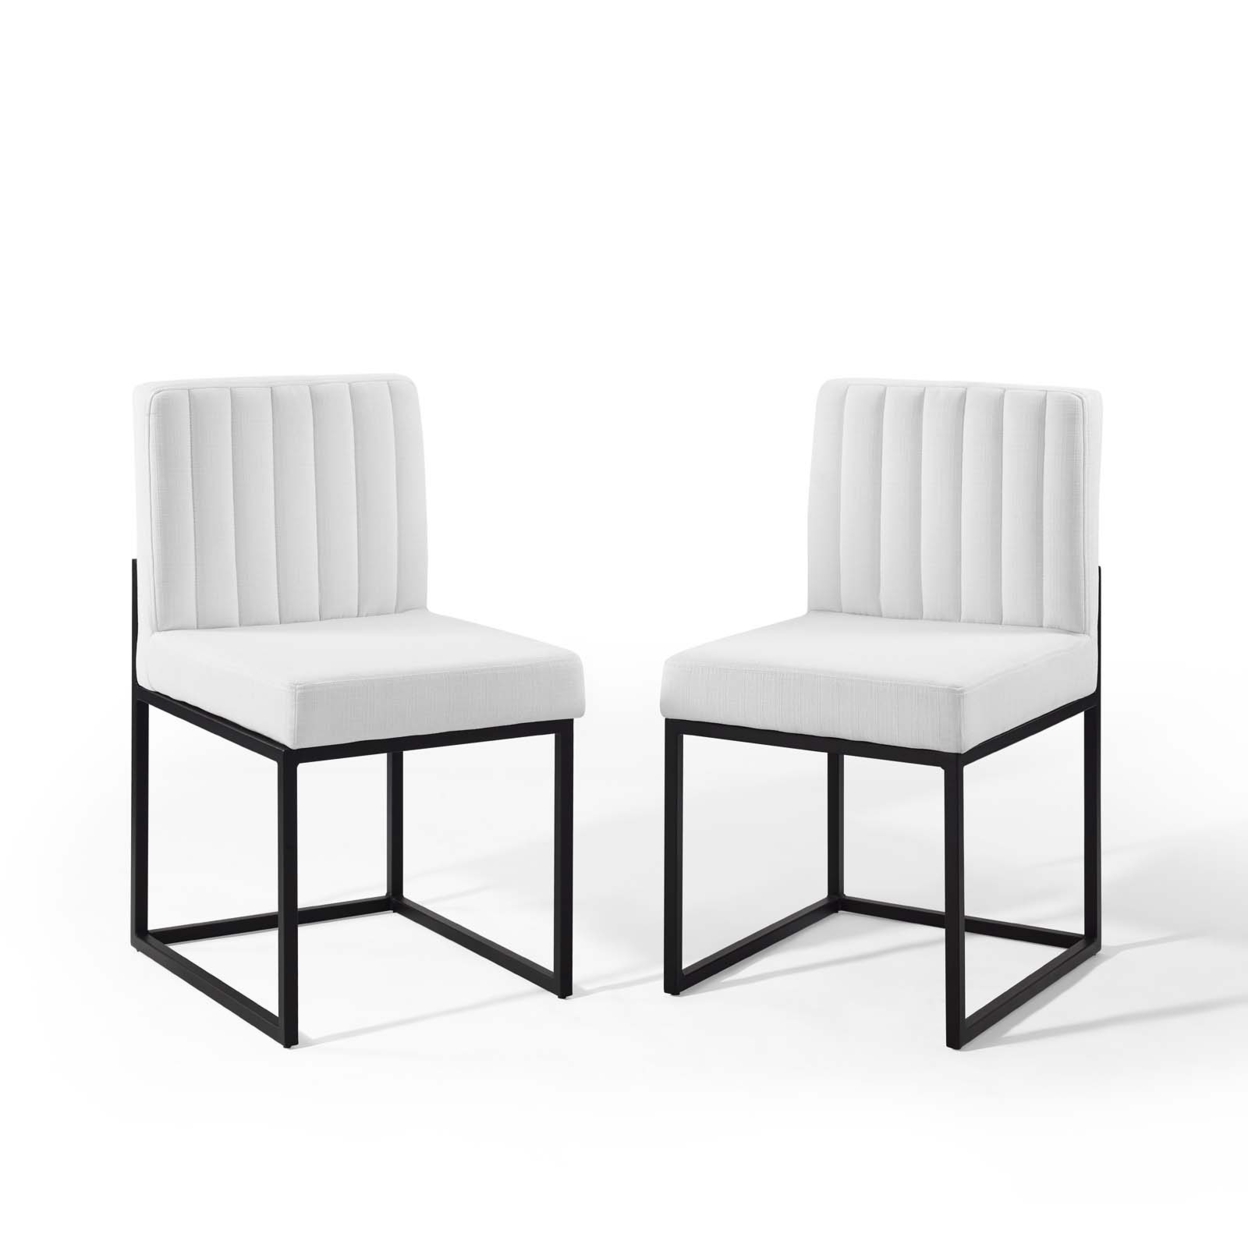 Carriage Dining Chair Upholstered Fabric Set Of 2, Black White